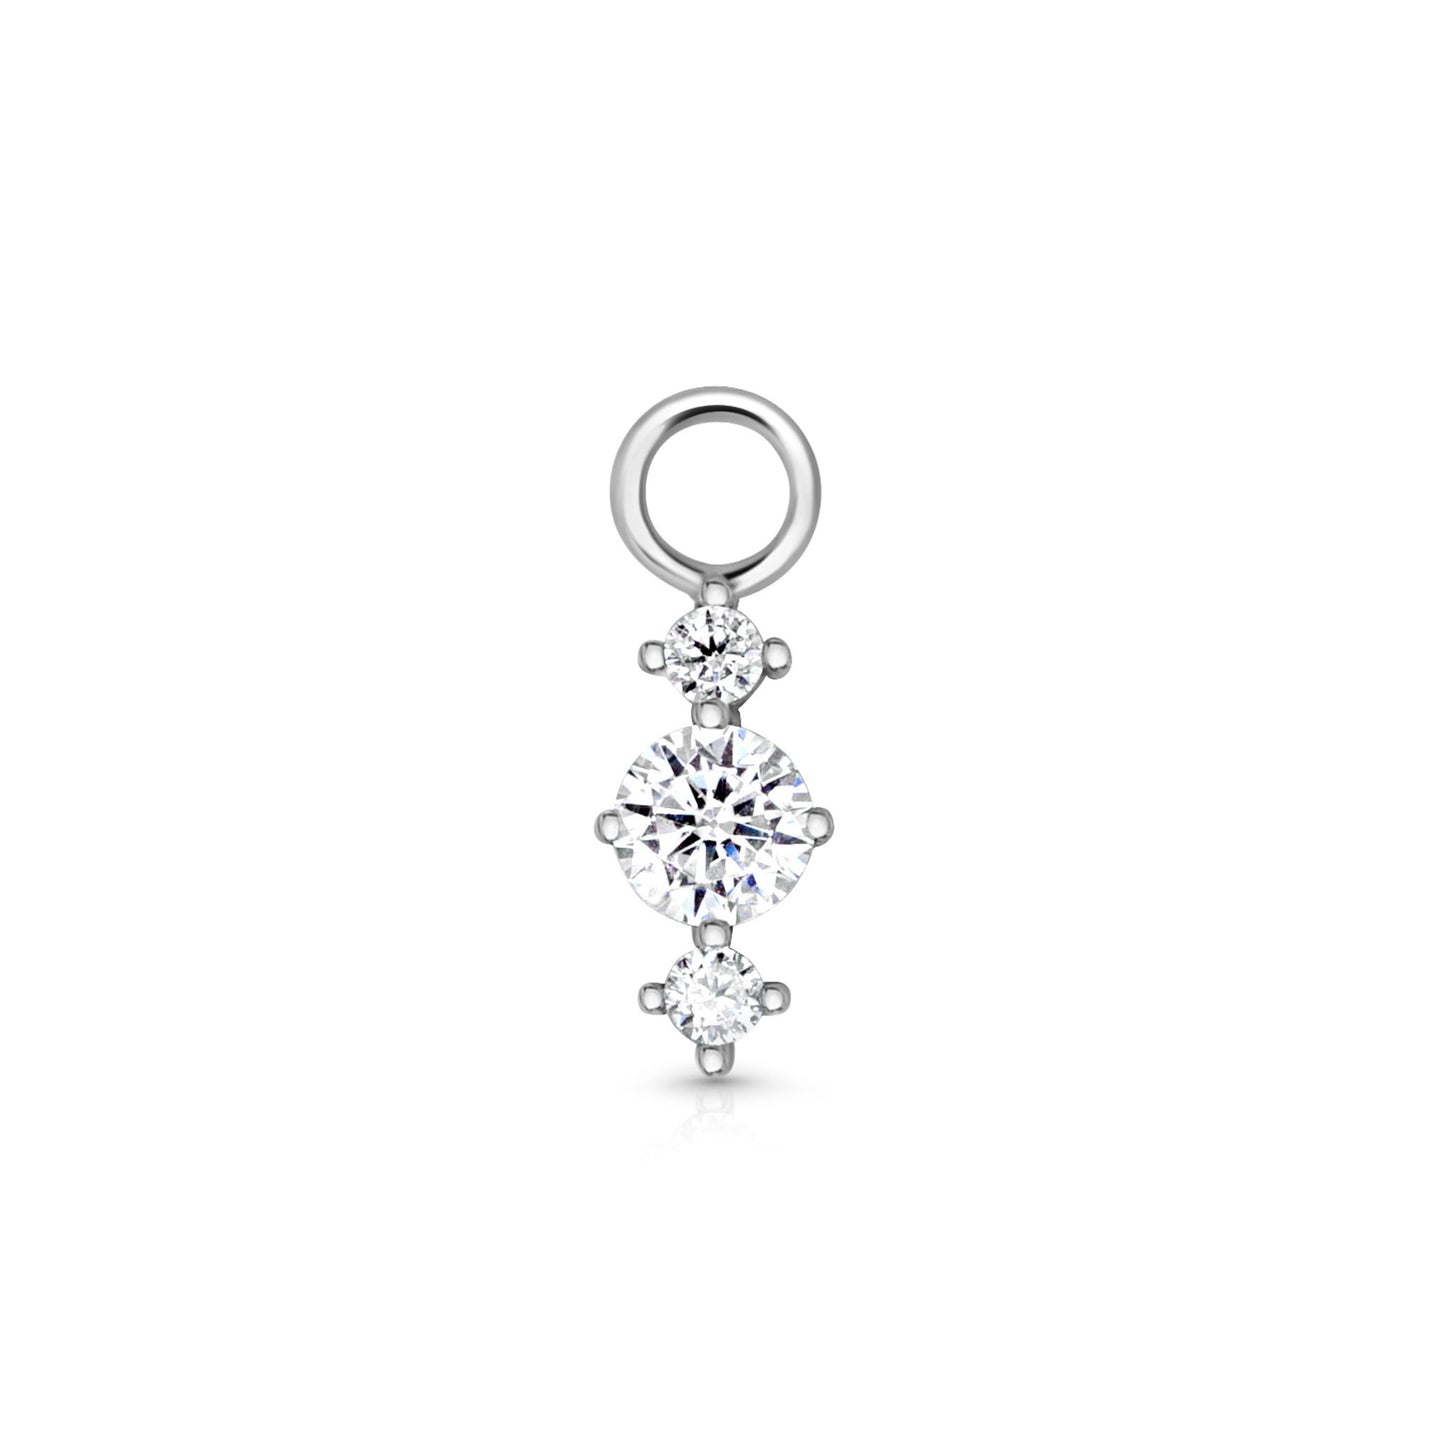 Frontal photo of the Cubic Zirconia Charm